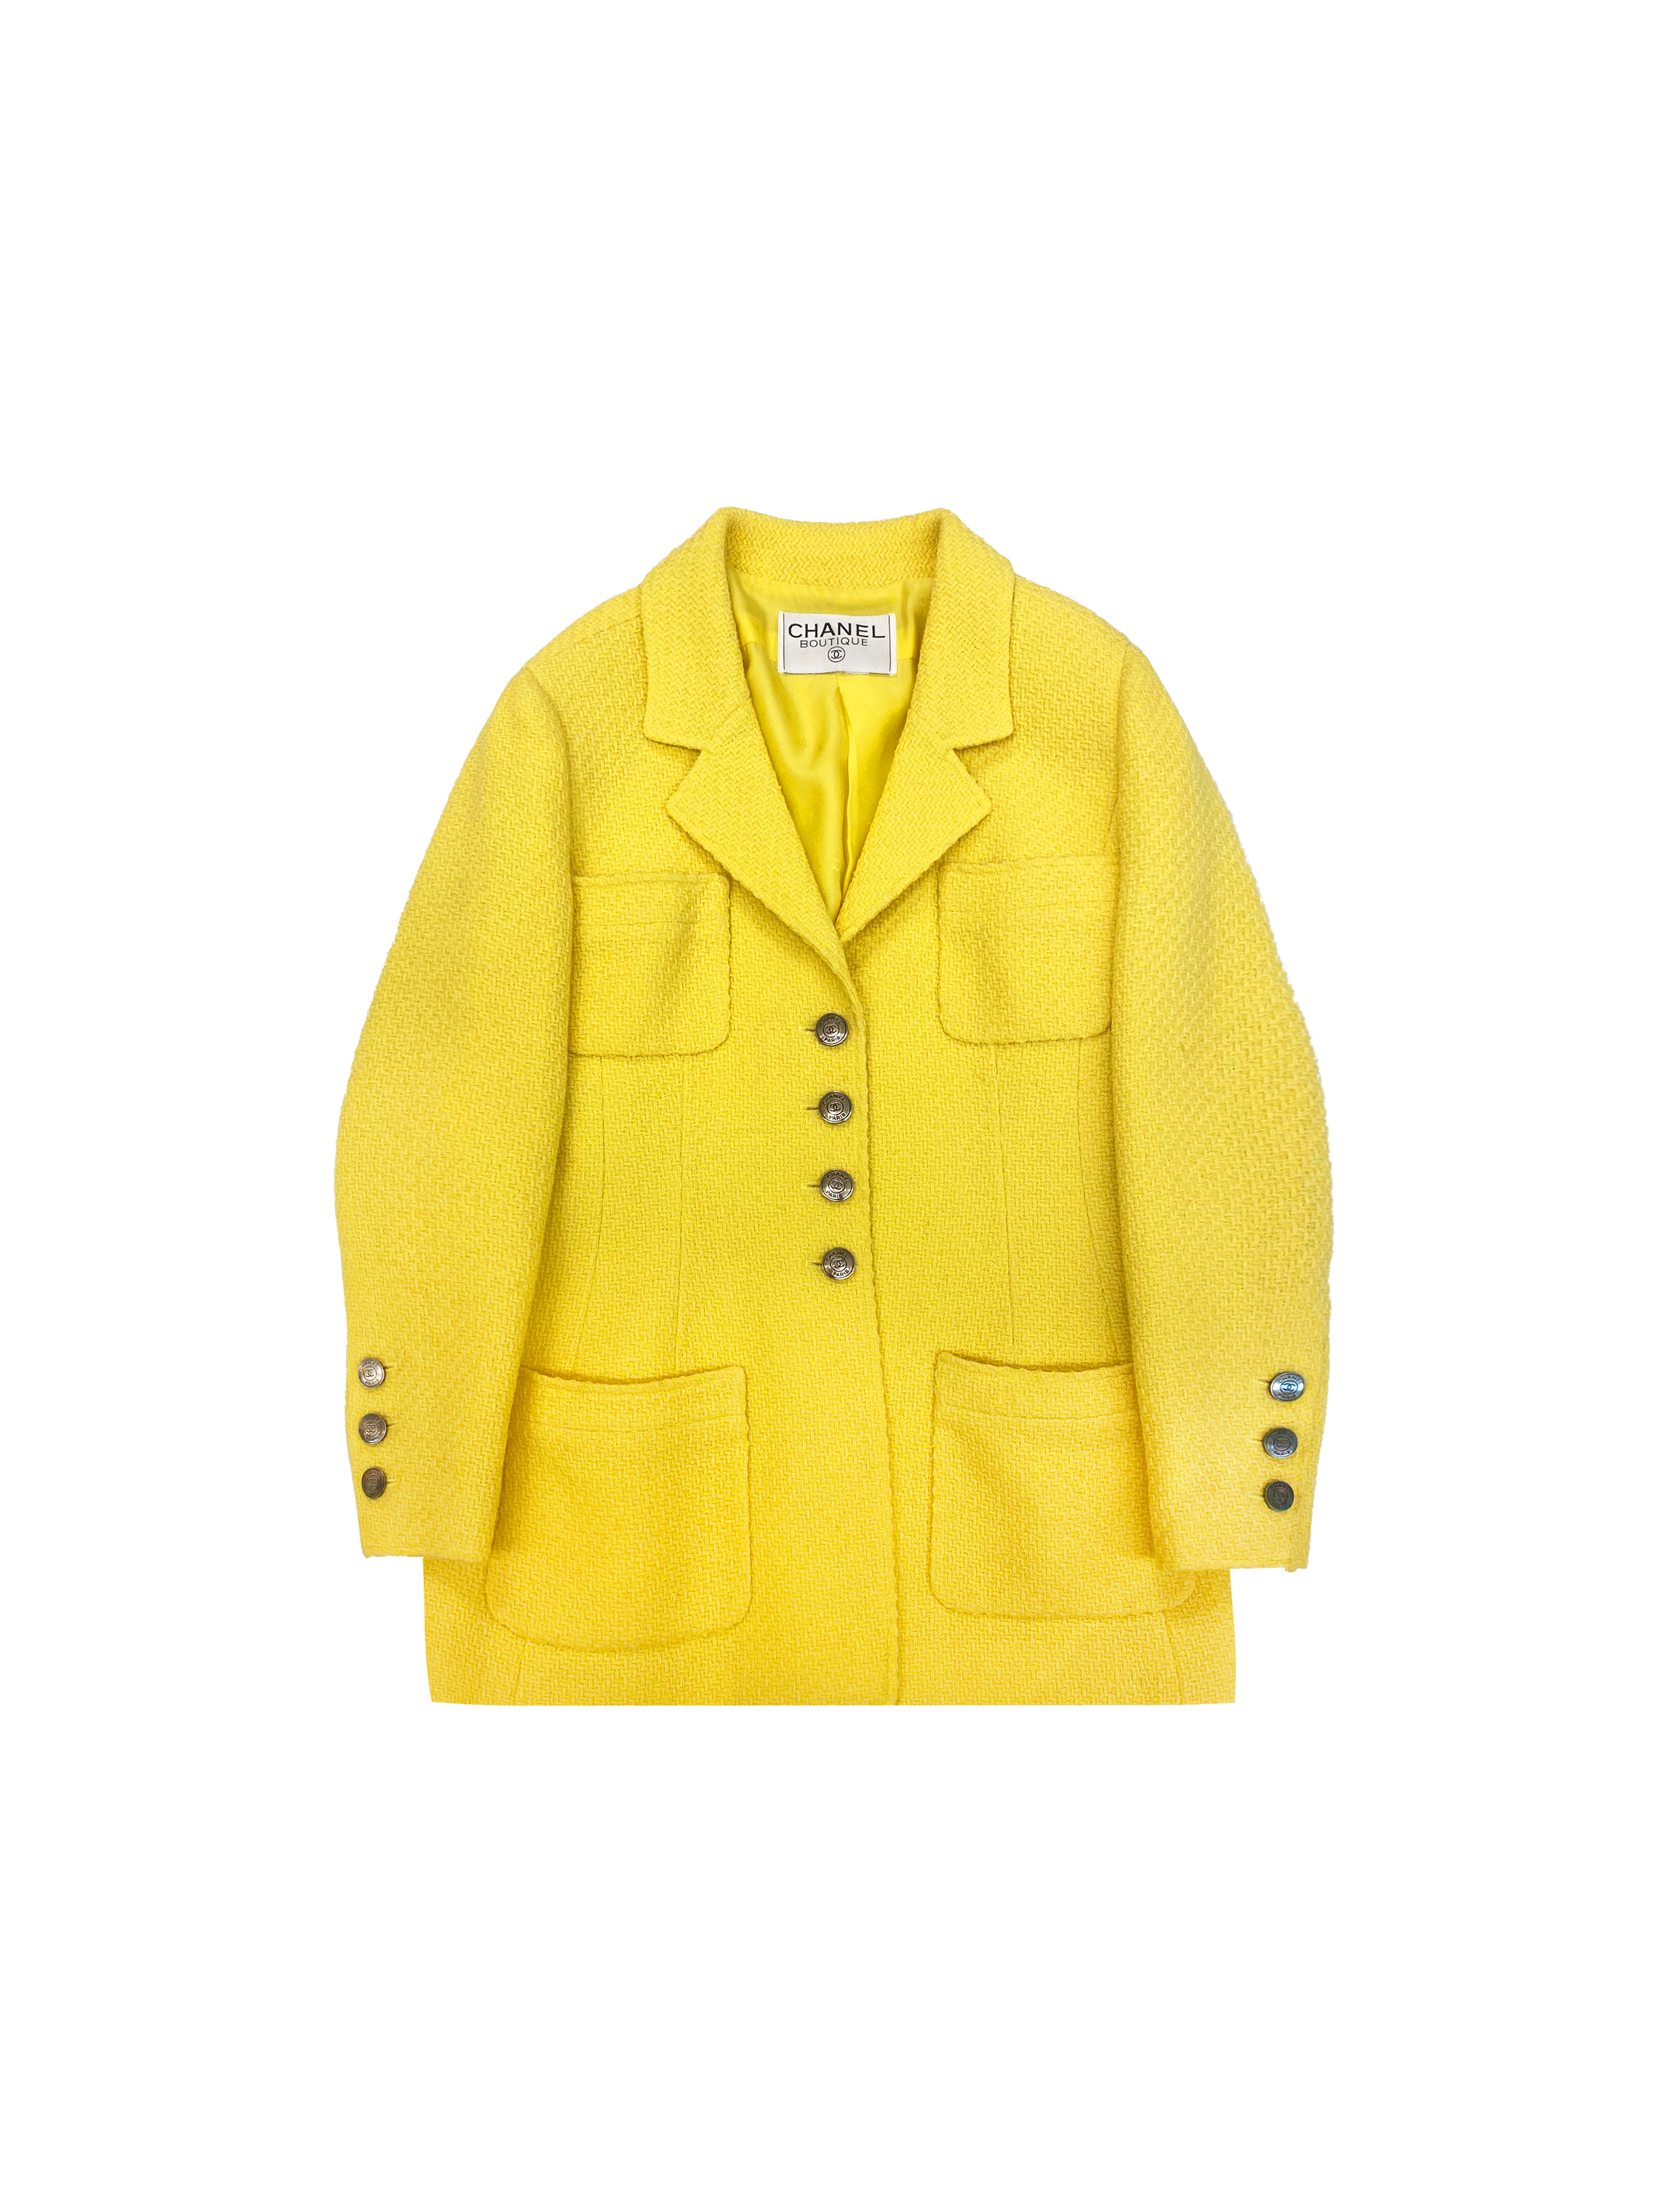 Chanel 1990s Yellow Tweed Blazer with Silver Buttons